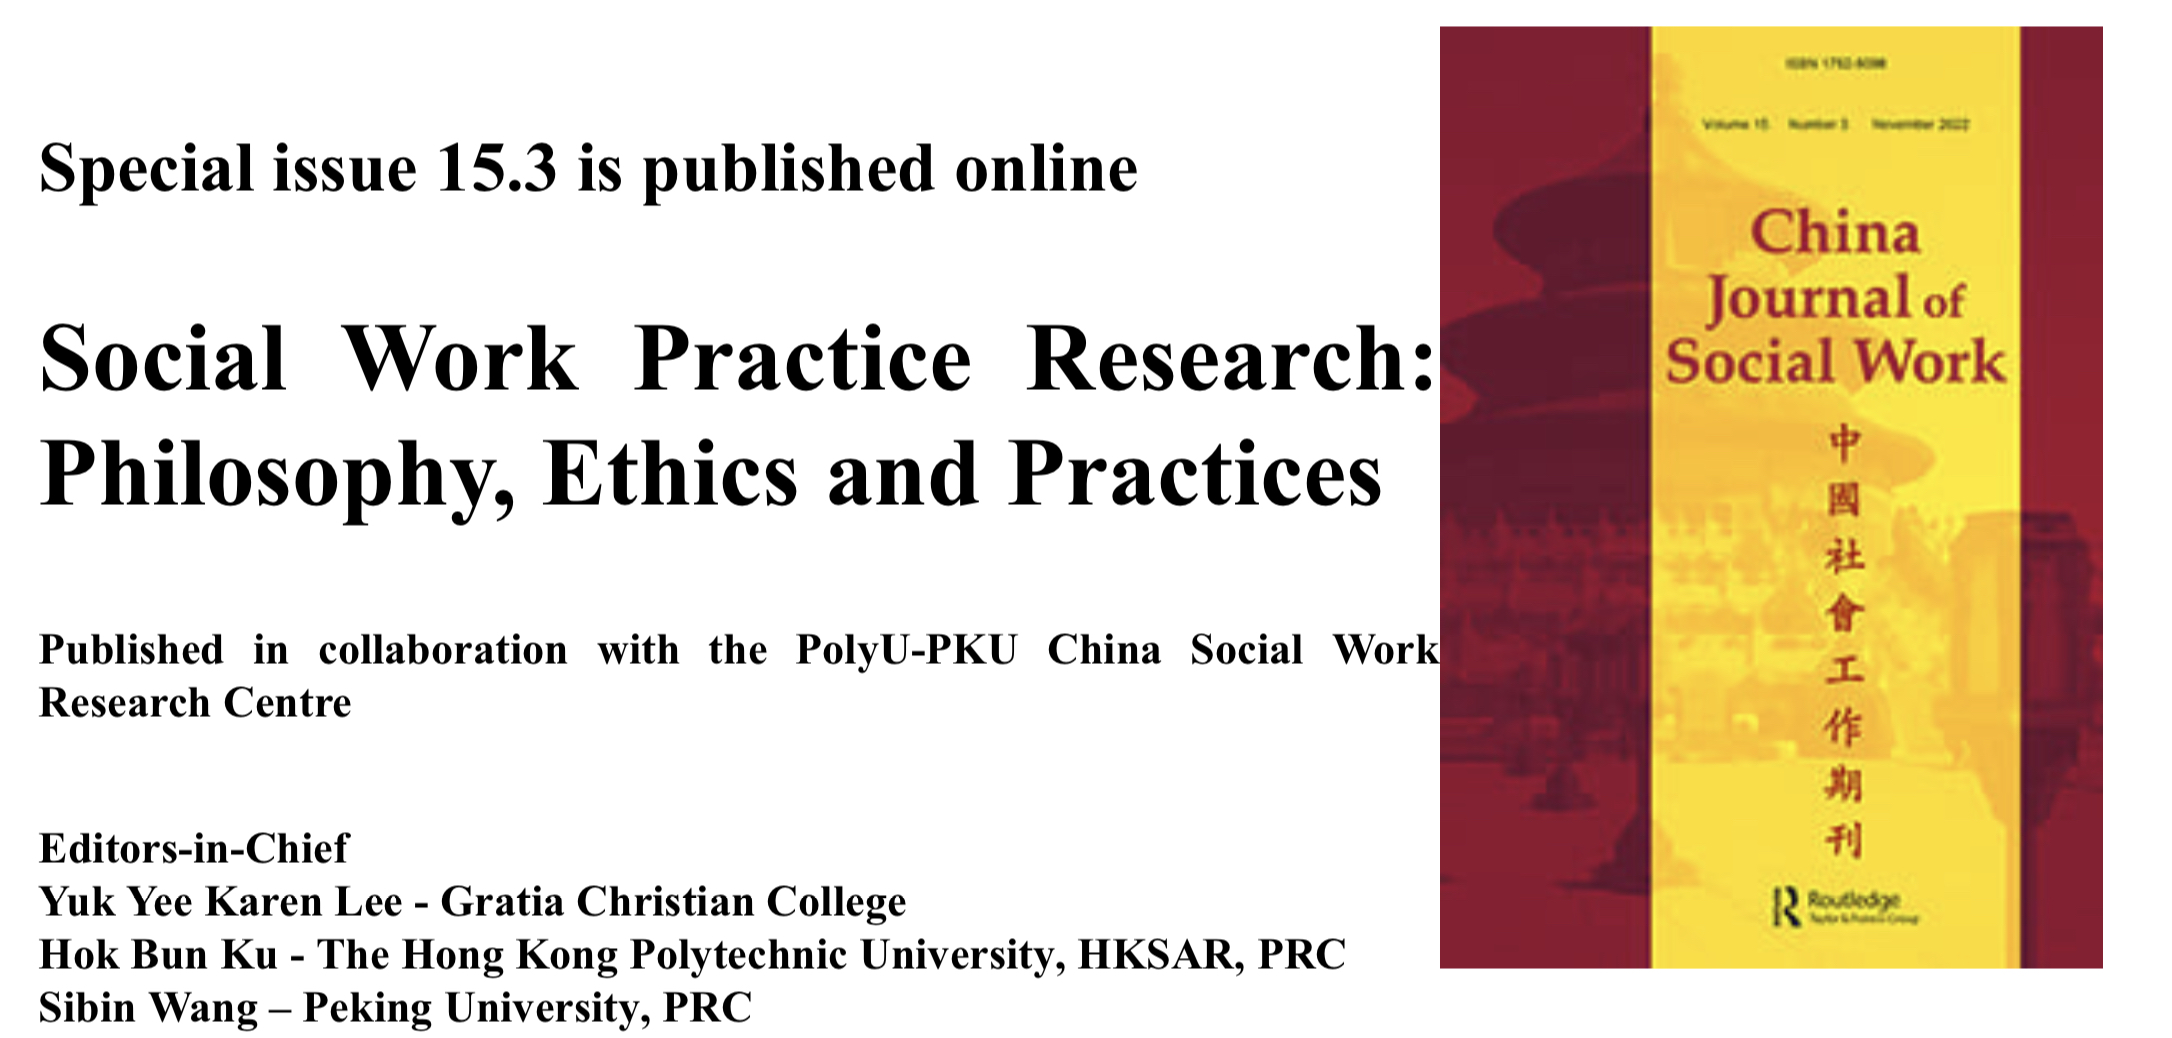 Special issue 15.3 is published online  Social Work Practice Research: Philosophy, Ethics and Practices